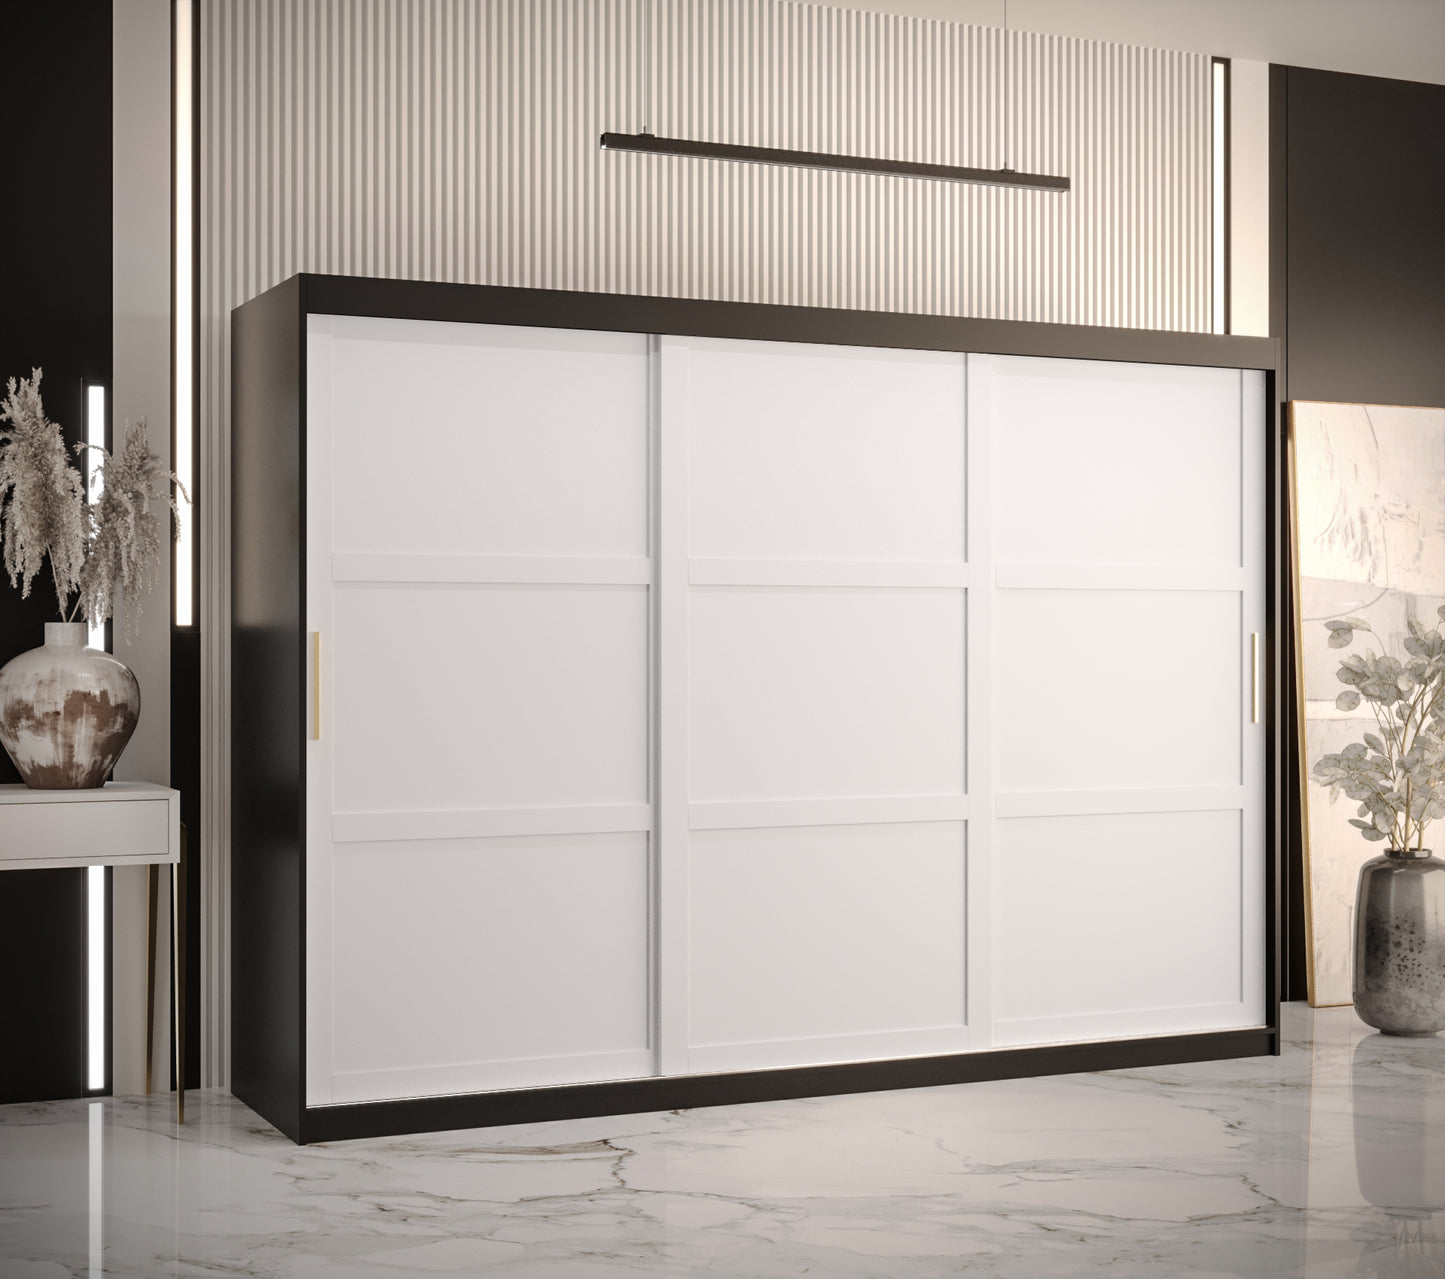 RAMIRA 1 - Wardrobe Sliding Door in Black or White Combinations, Shelves, Rails, Drawer Optional, ASSEMBLY SERVICE INCLUDED >250cm<